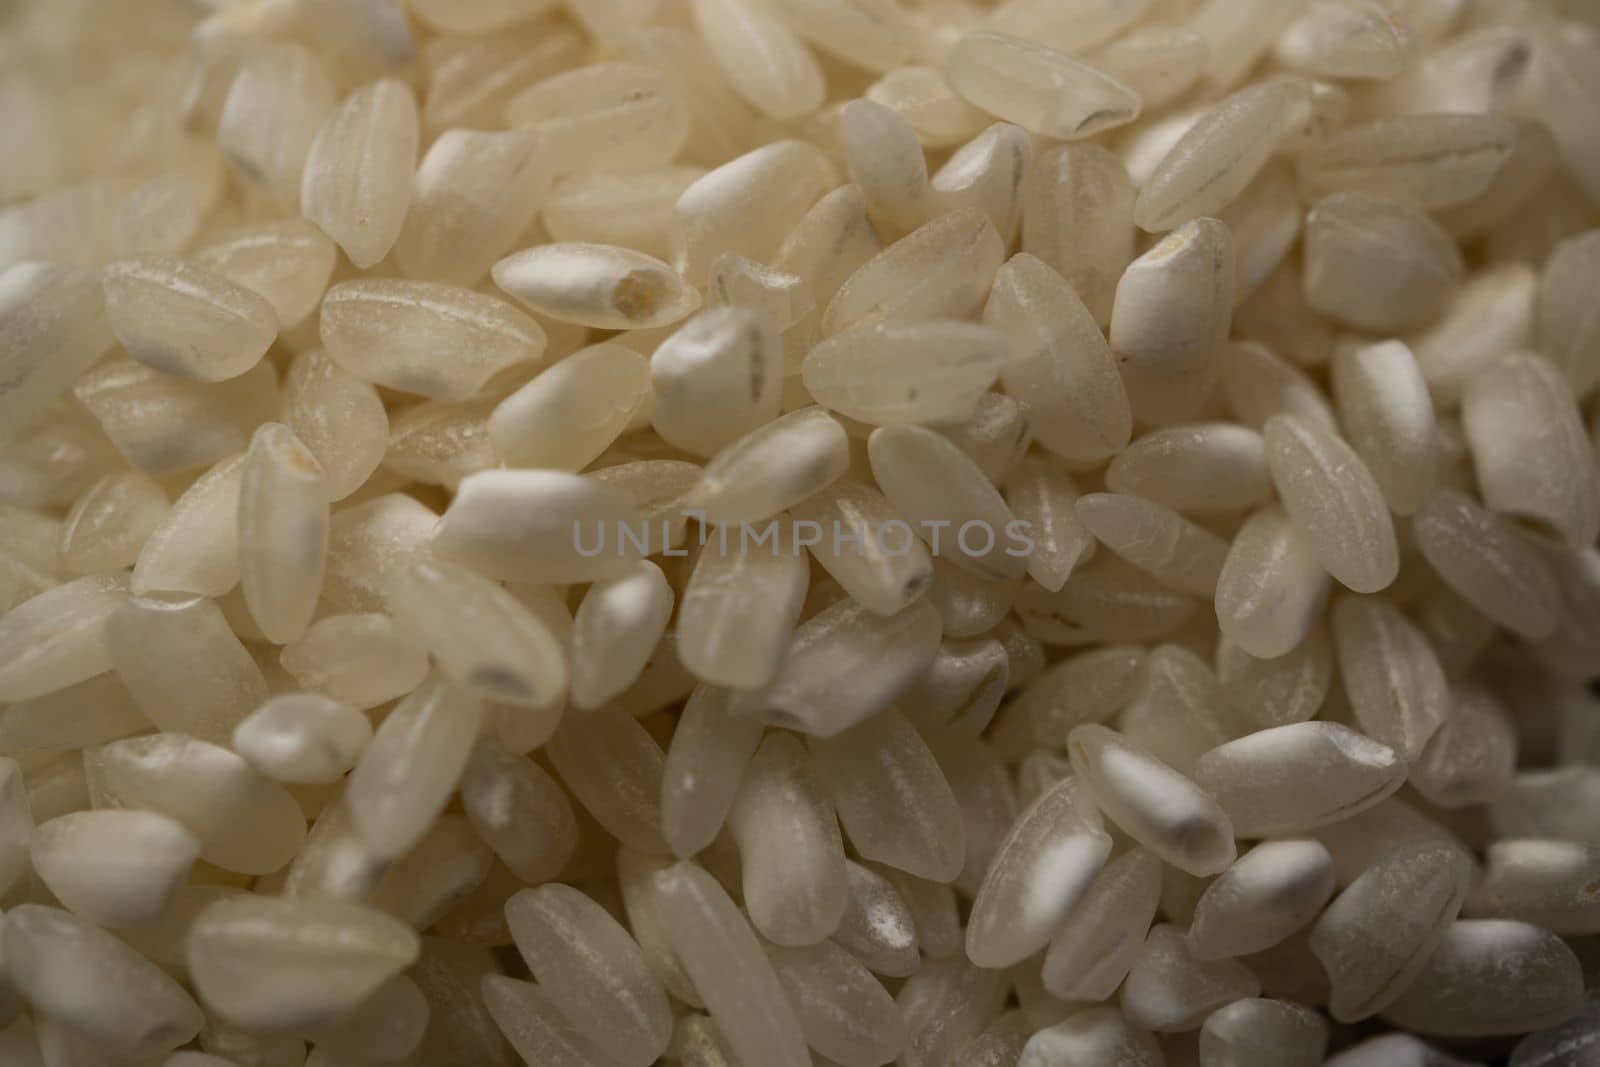 close-up of rice grains out of focus by joseantona